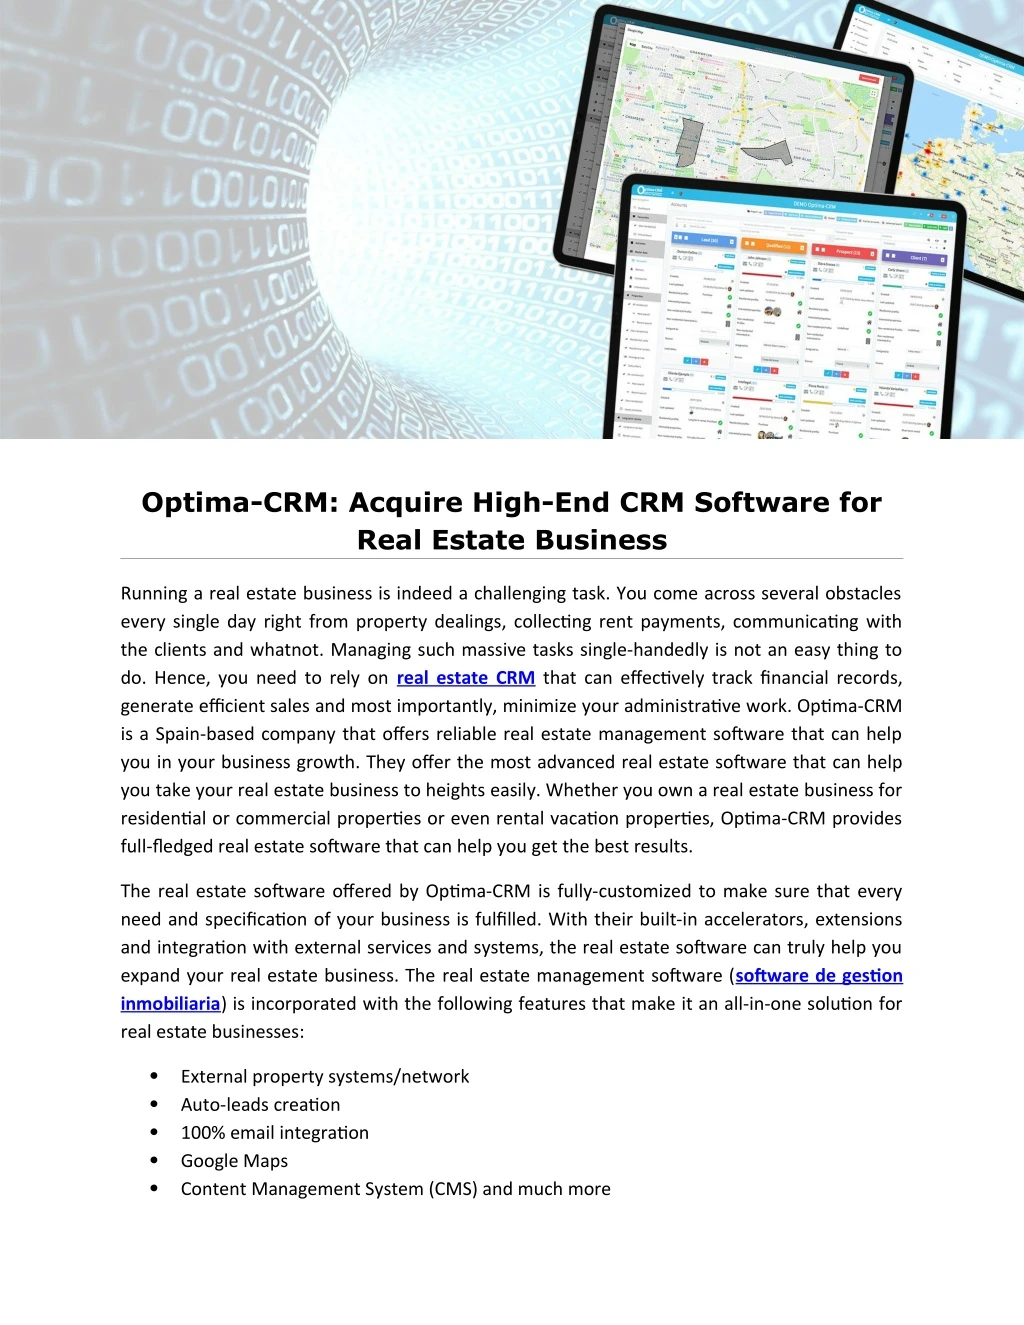 optima crm acquire high end crm software for real